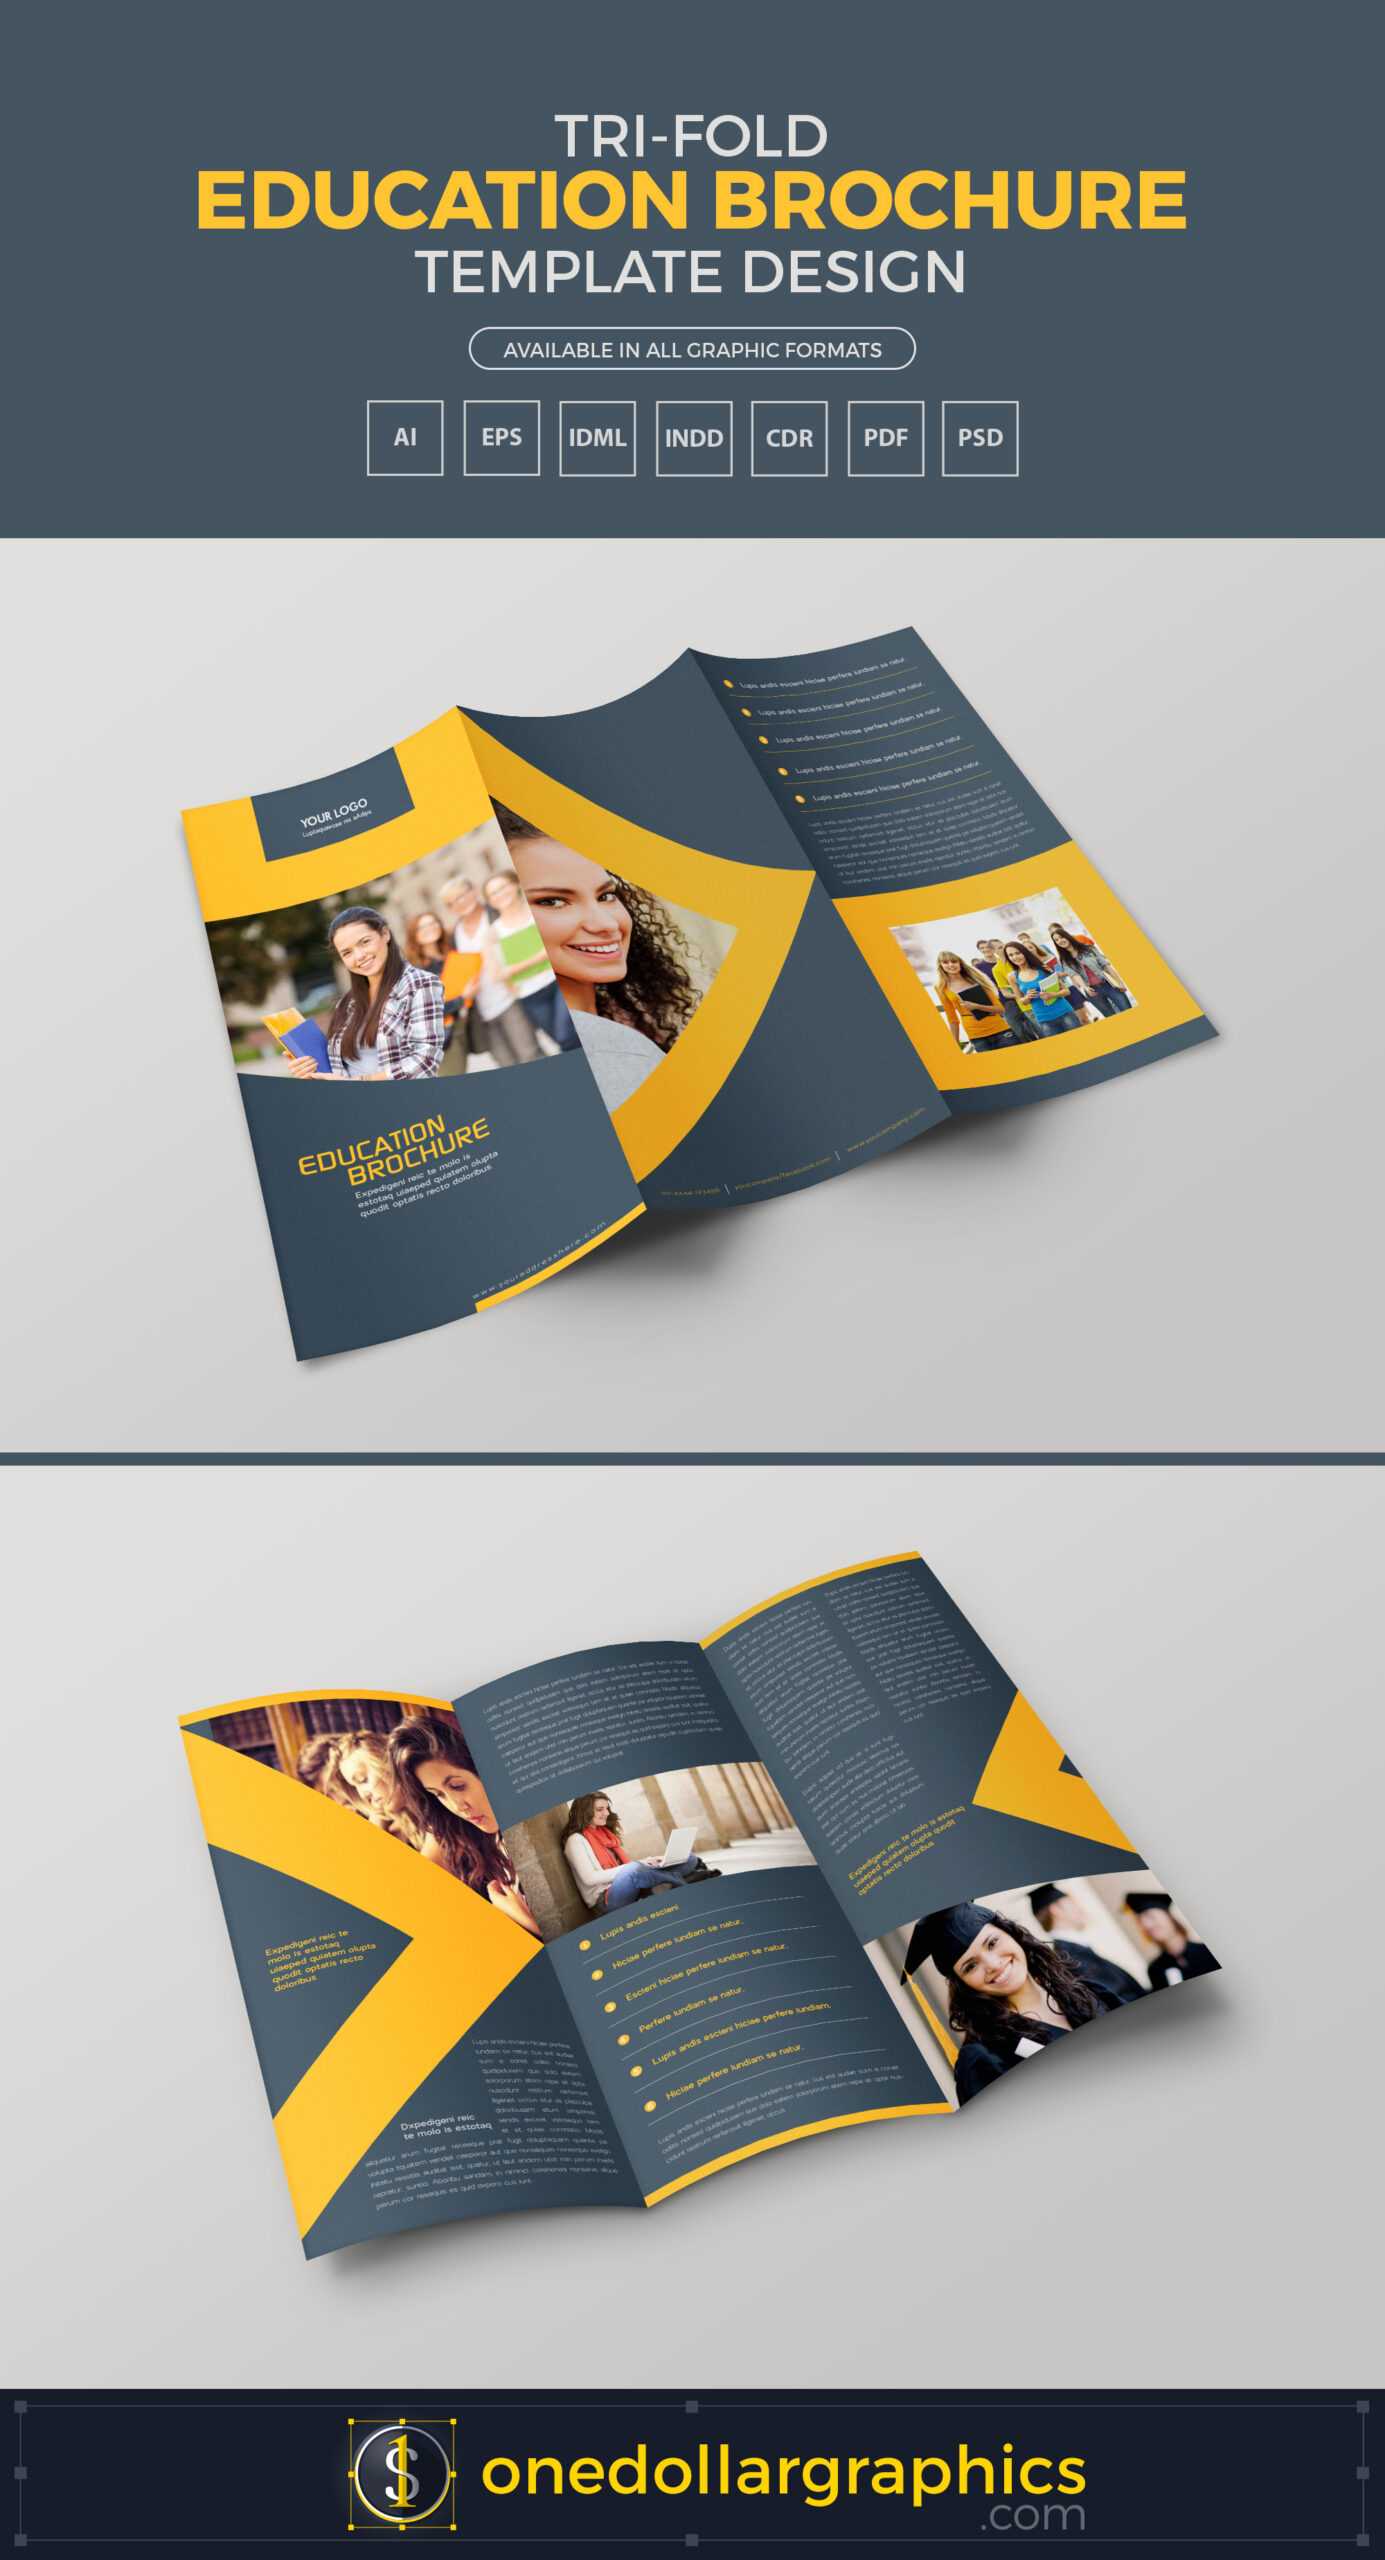 018 Tri Fold Brochure Template Indd Ideas Education Design With Regard To Tri Fold Brochure Template Indesign Free Download